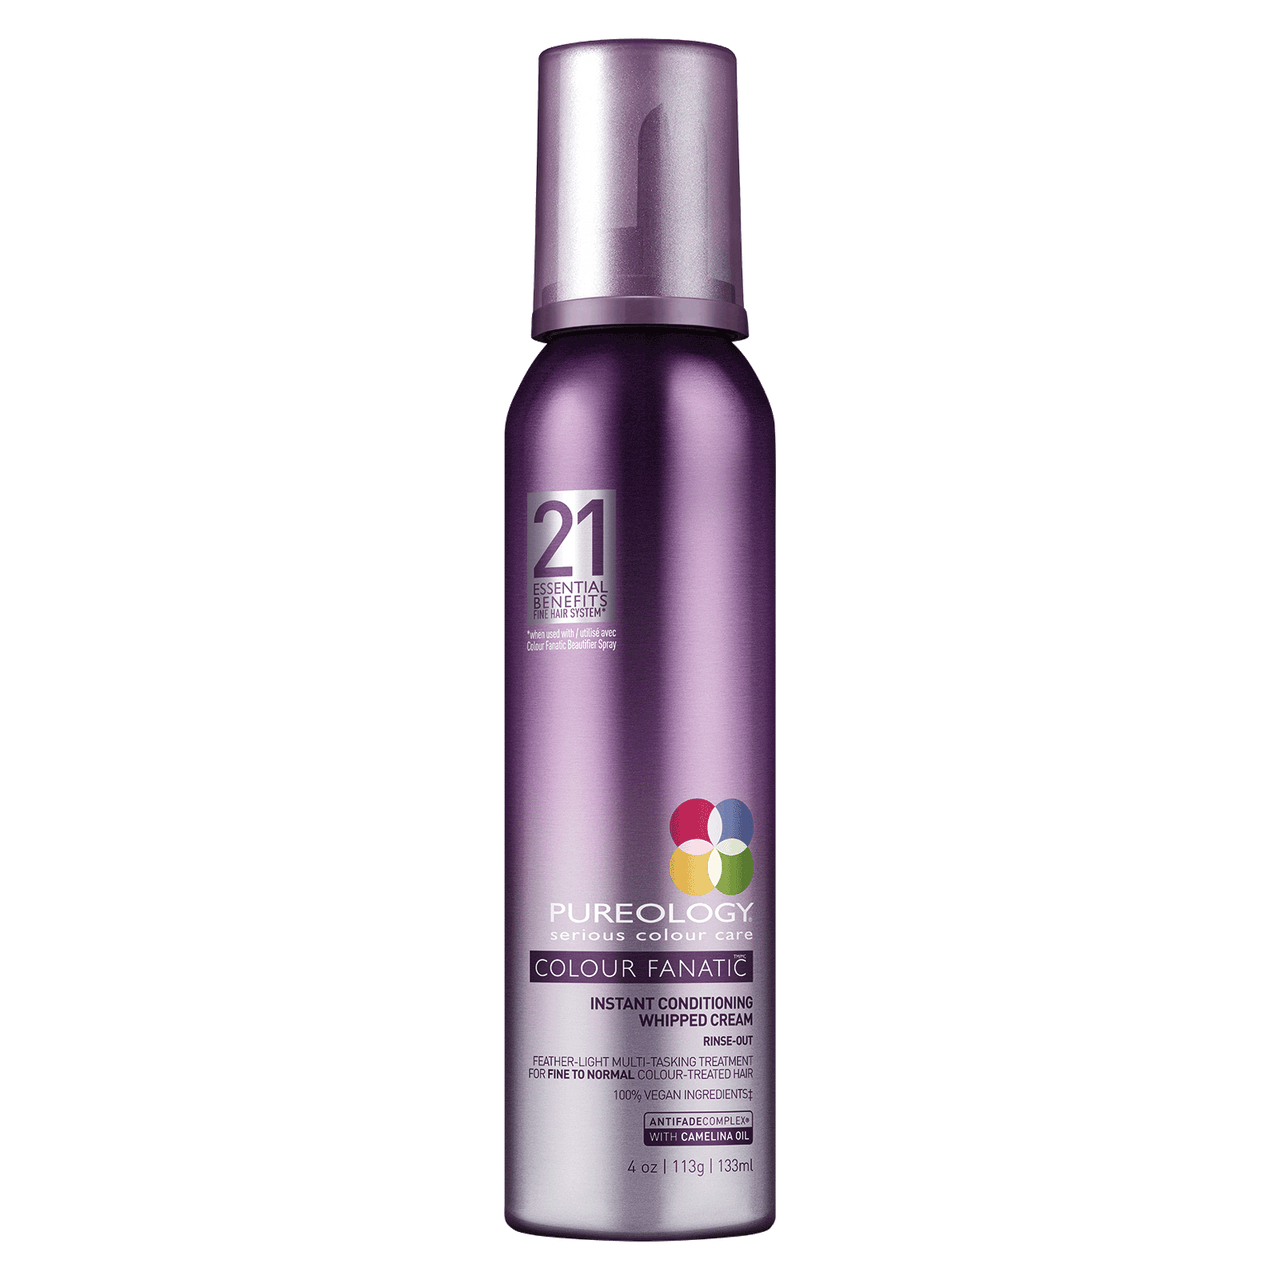 Pureology Color Fanatic Conditioning Whipped Hair Cream 4 fl. oz.